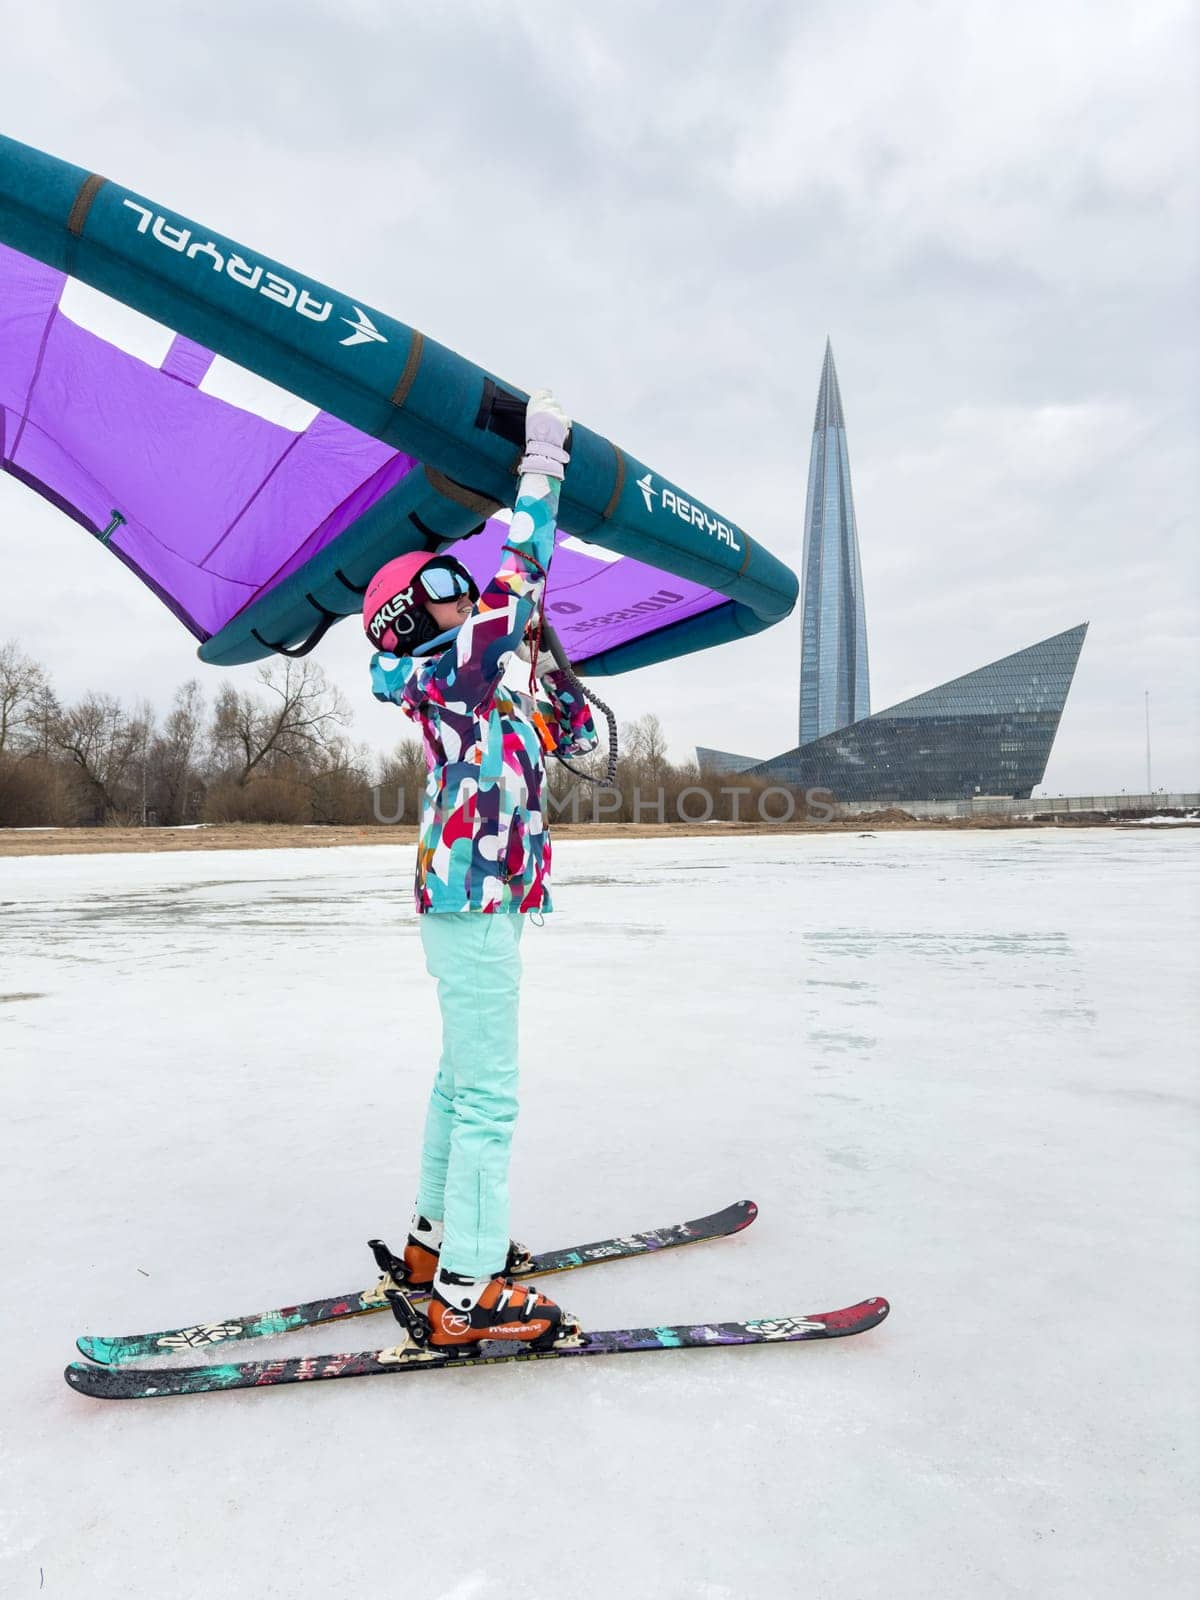 Russia, St.Petersburg, 14 March 2024: A girl in bright colored ski gear is ready to ski on ice with an air wing at cloudy weather, the Lakhta Center skyscraper in the background, helmet and glasses by vladimirdrozdin